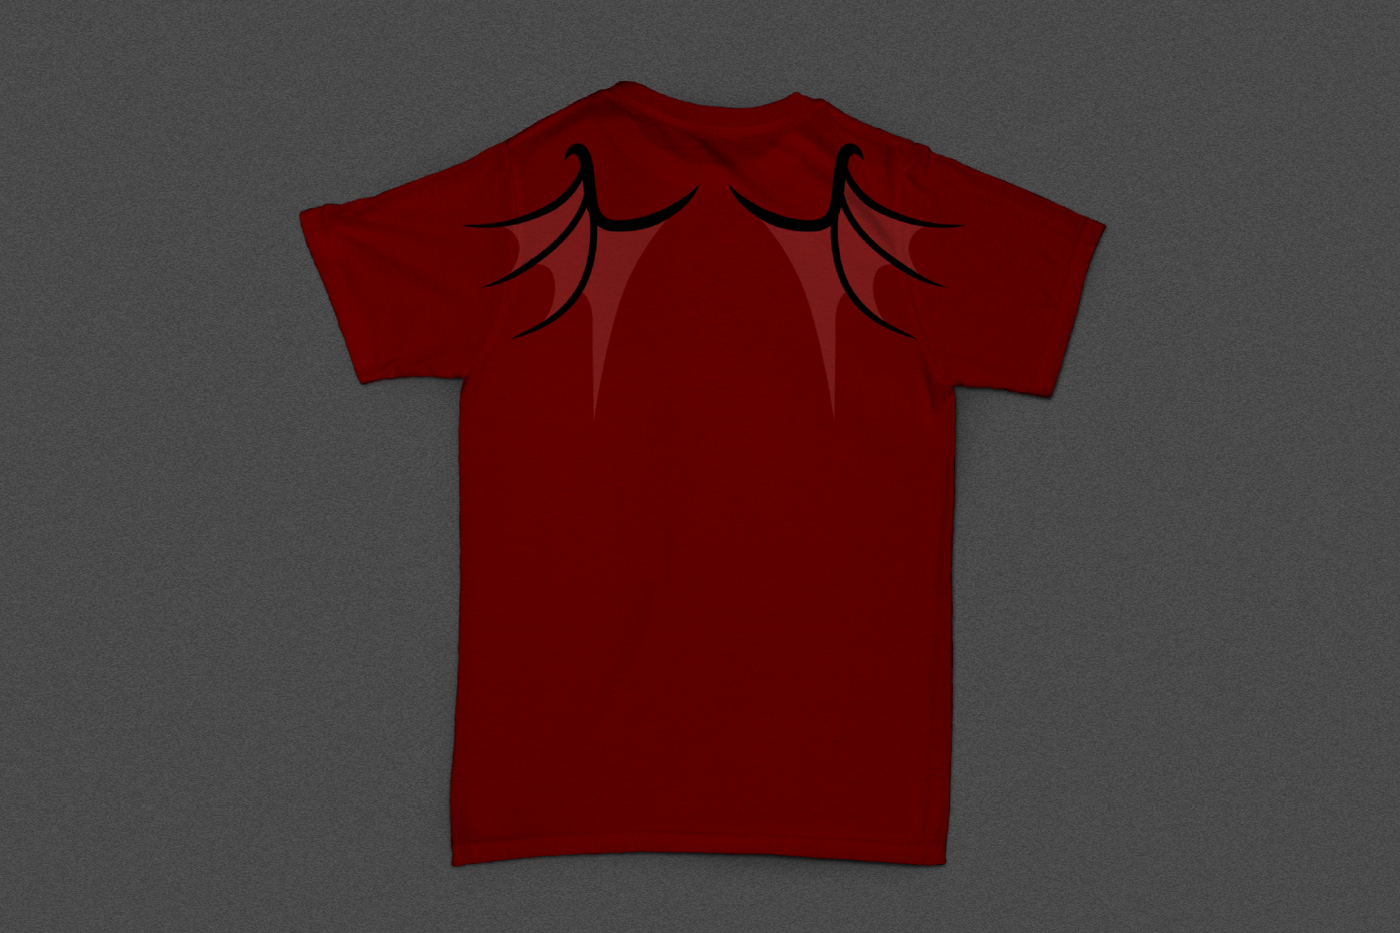 The back of a red shirt with dragon wing design on the shoulders.